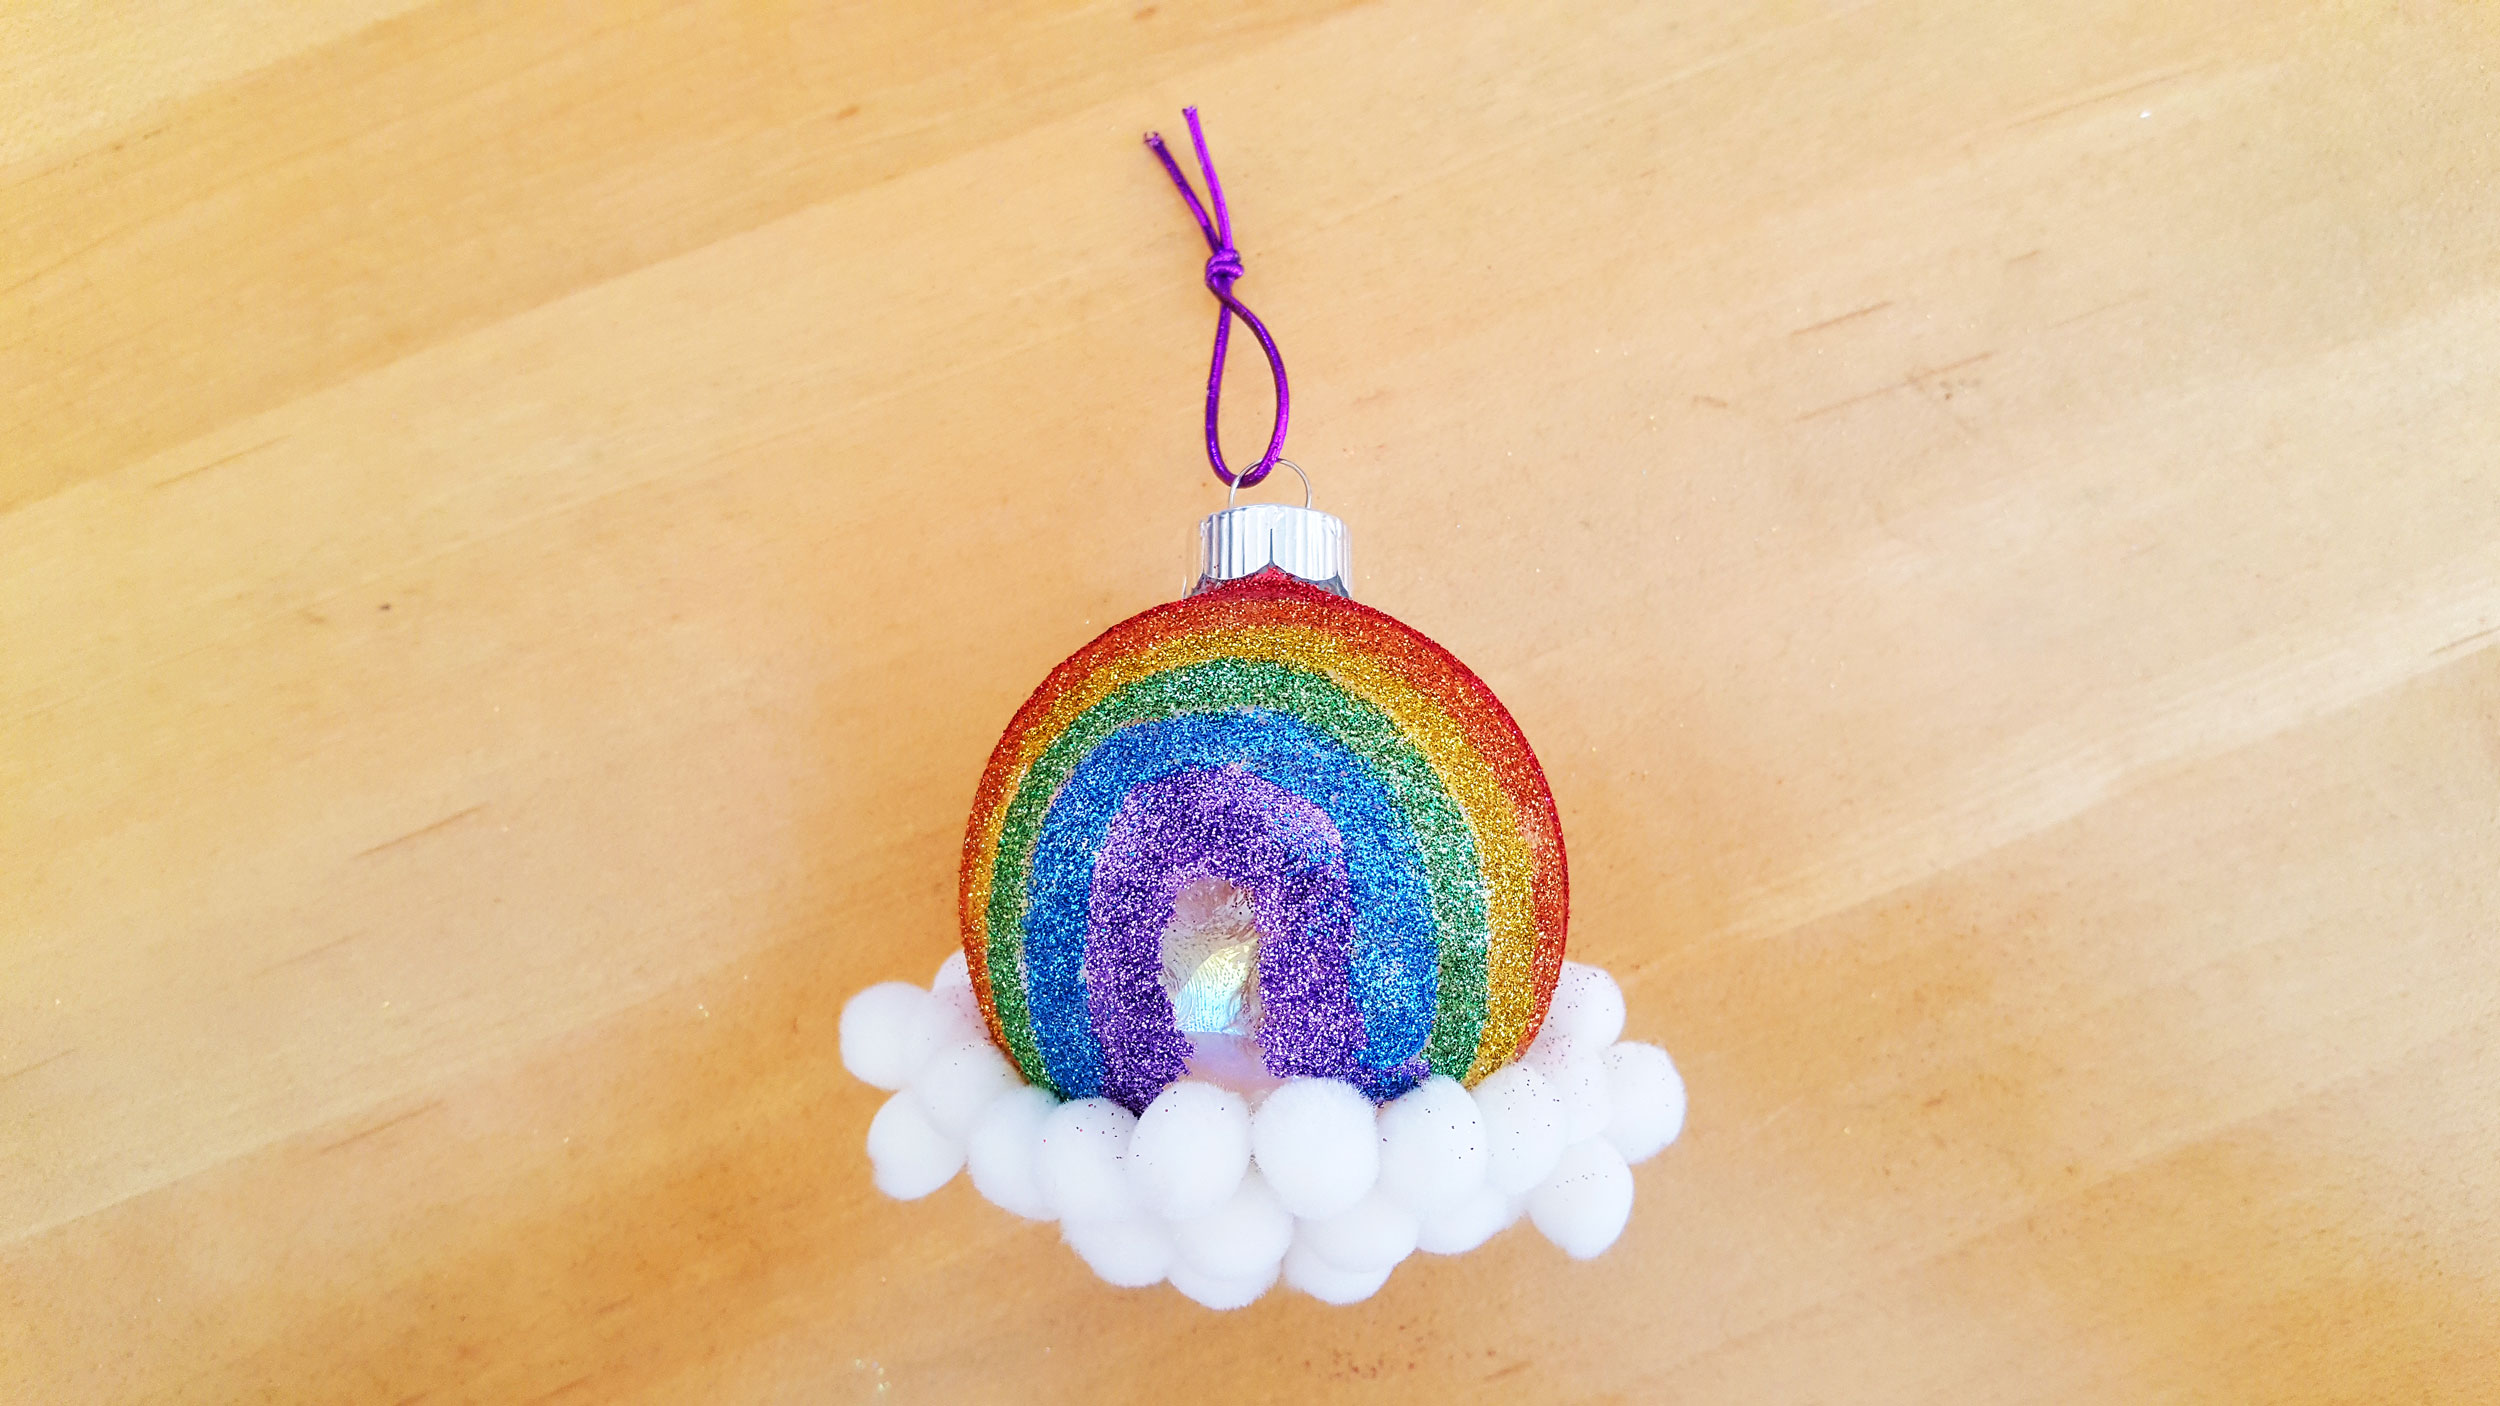  That’s it!  Now your have a colorful rainbow craft that you can hang in your home from a window or ornament stand. | OrnamentShop.com